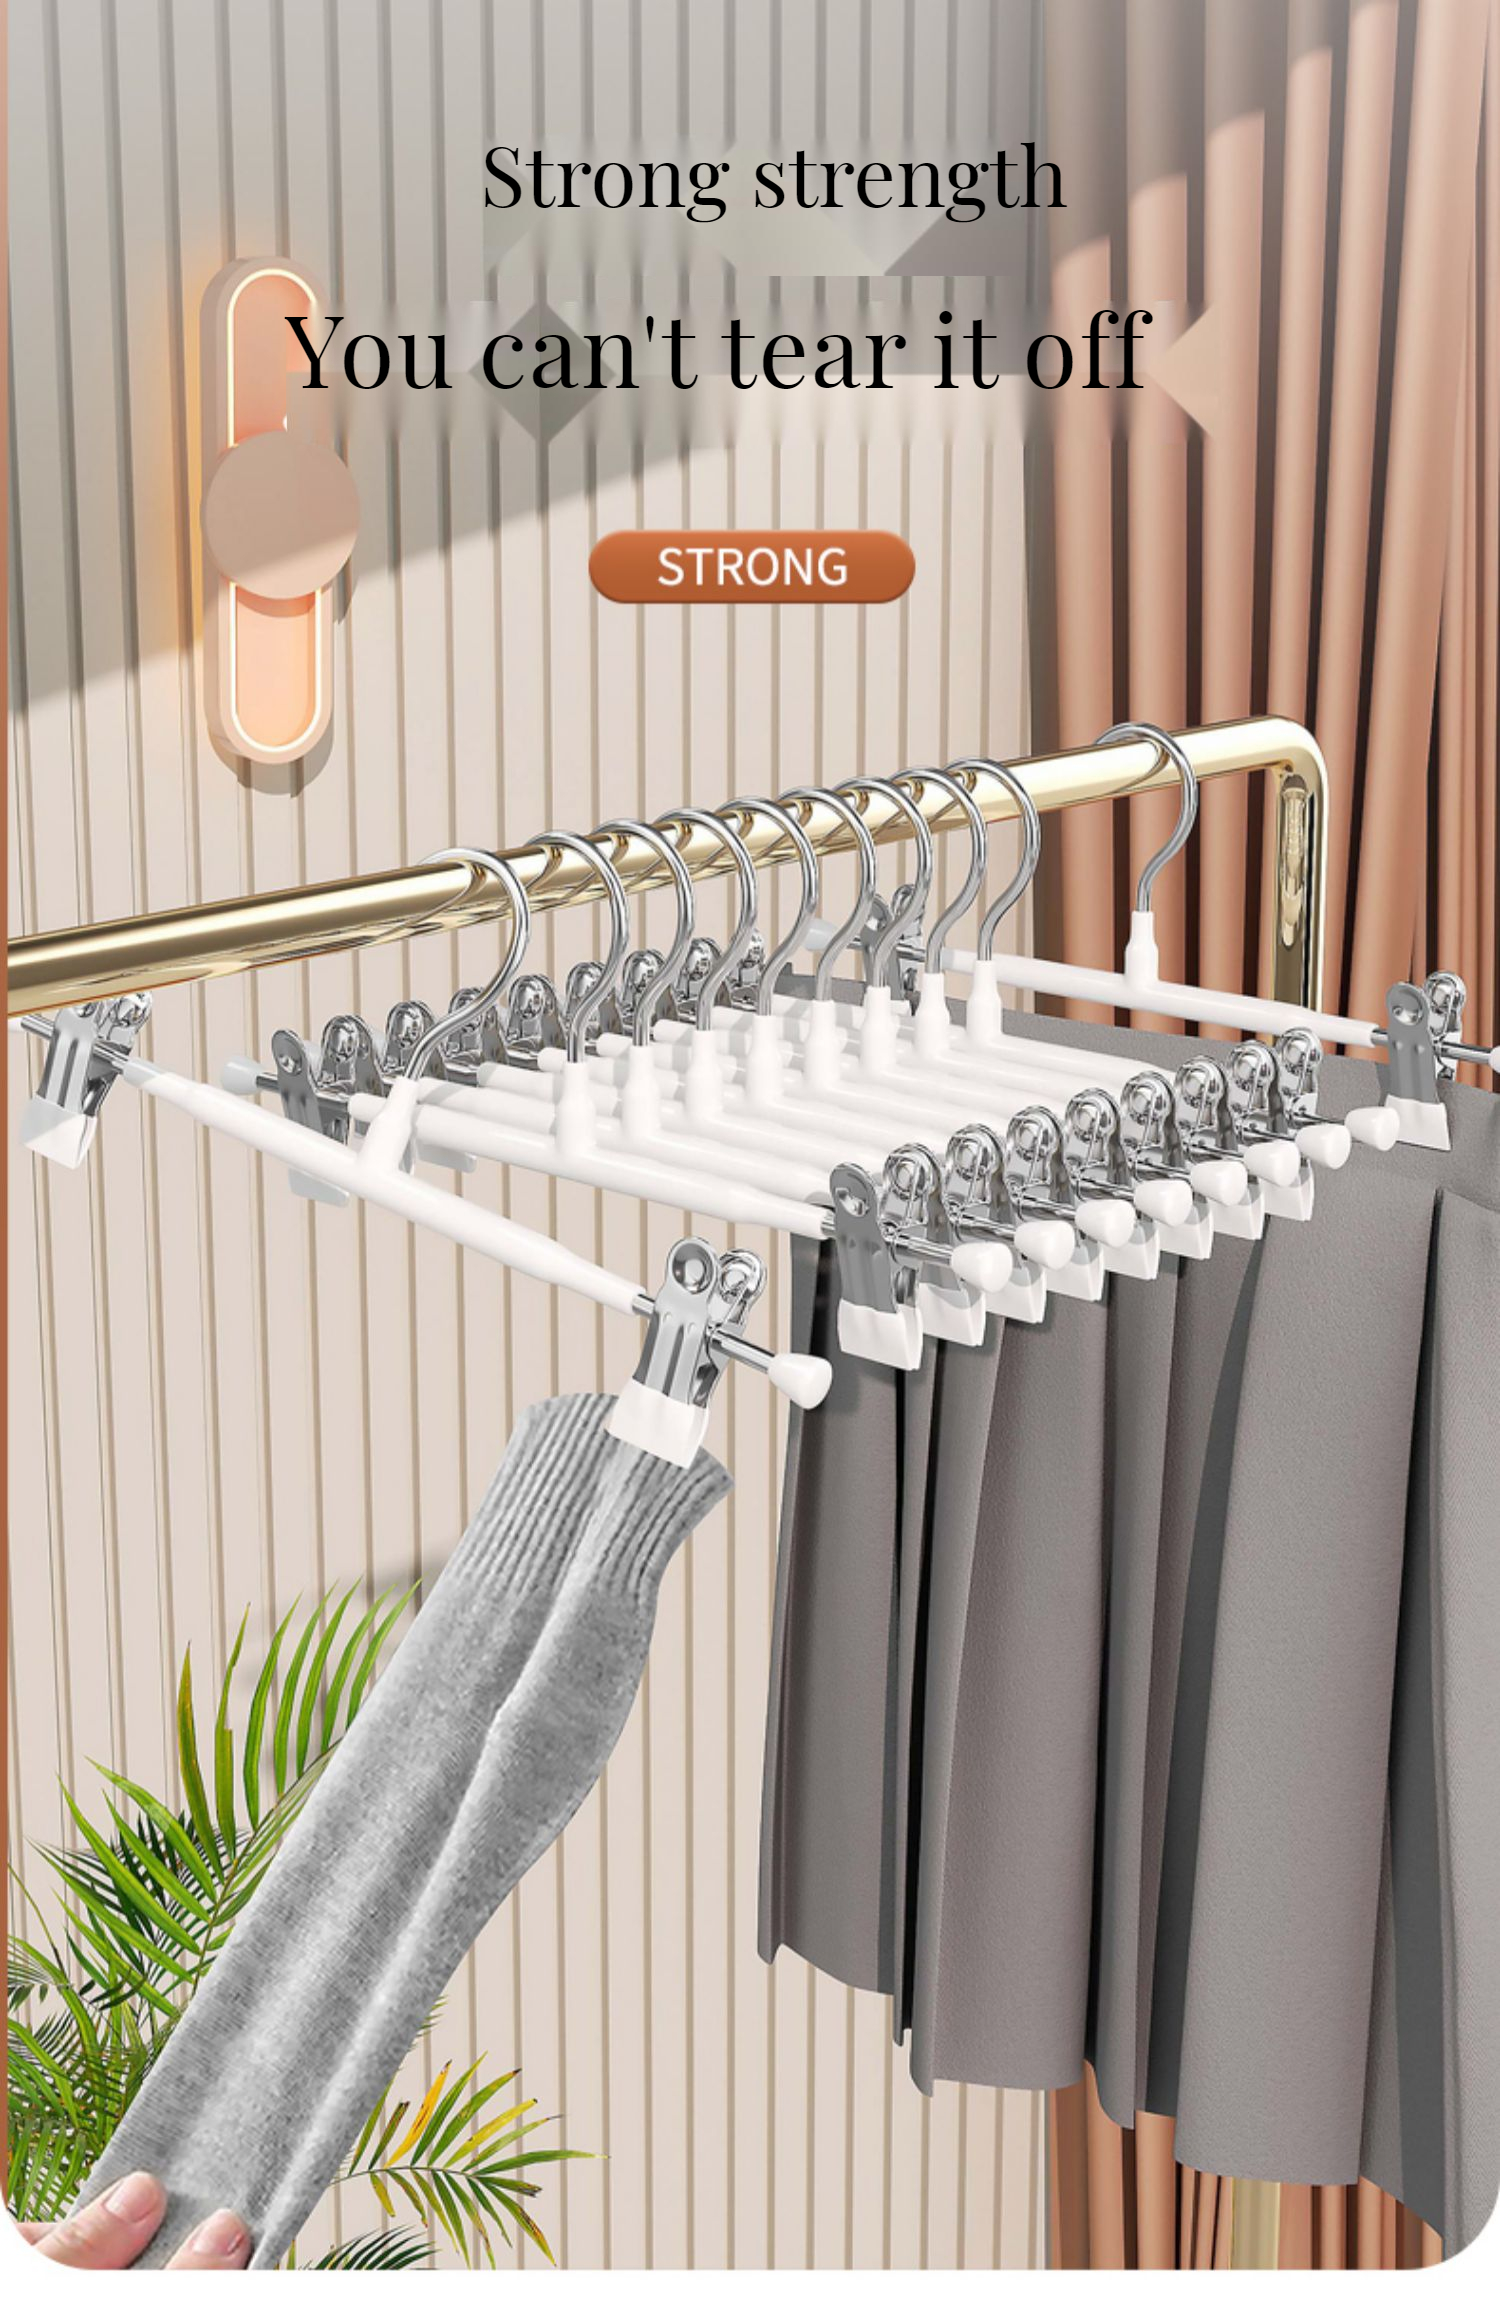 Shoppers Love These Space-Saving Skirt Hangers